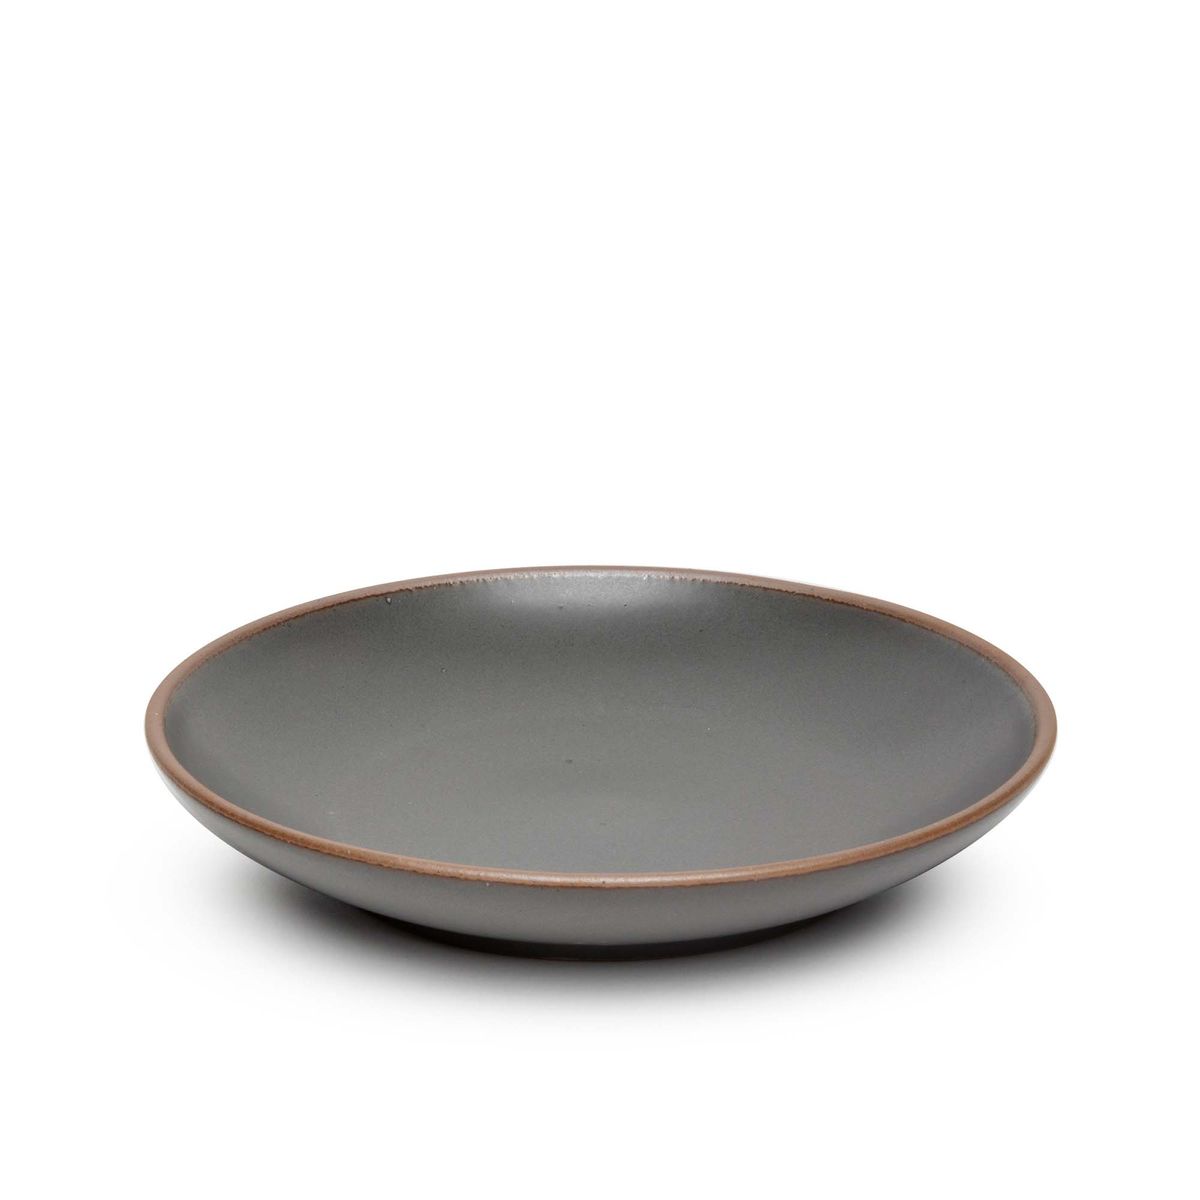 A large ceramic plate with a curved bowl edge in a cool, medium grey color featuring iron speckles and an unglazed rim.